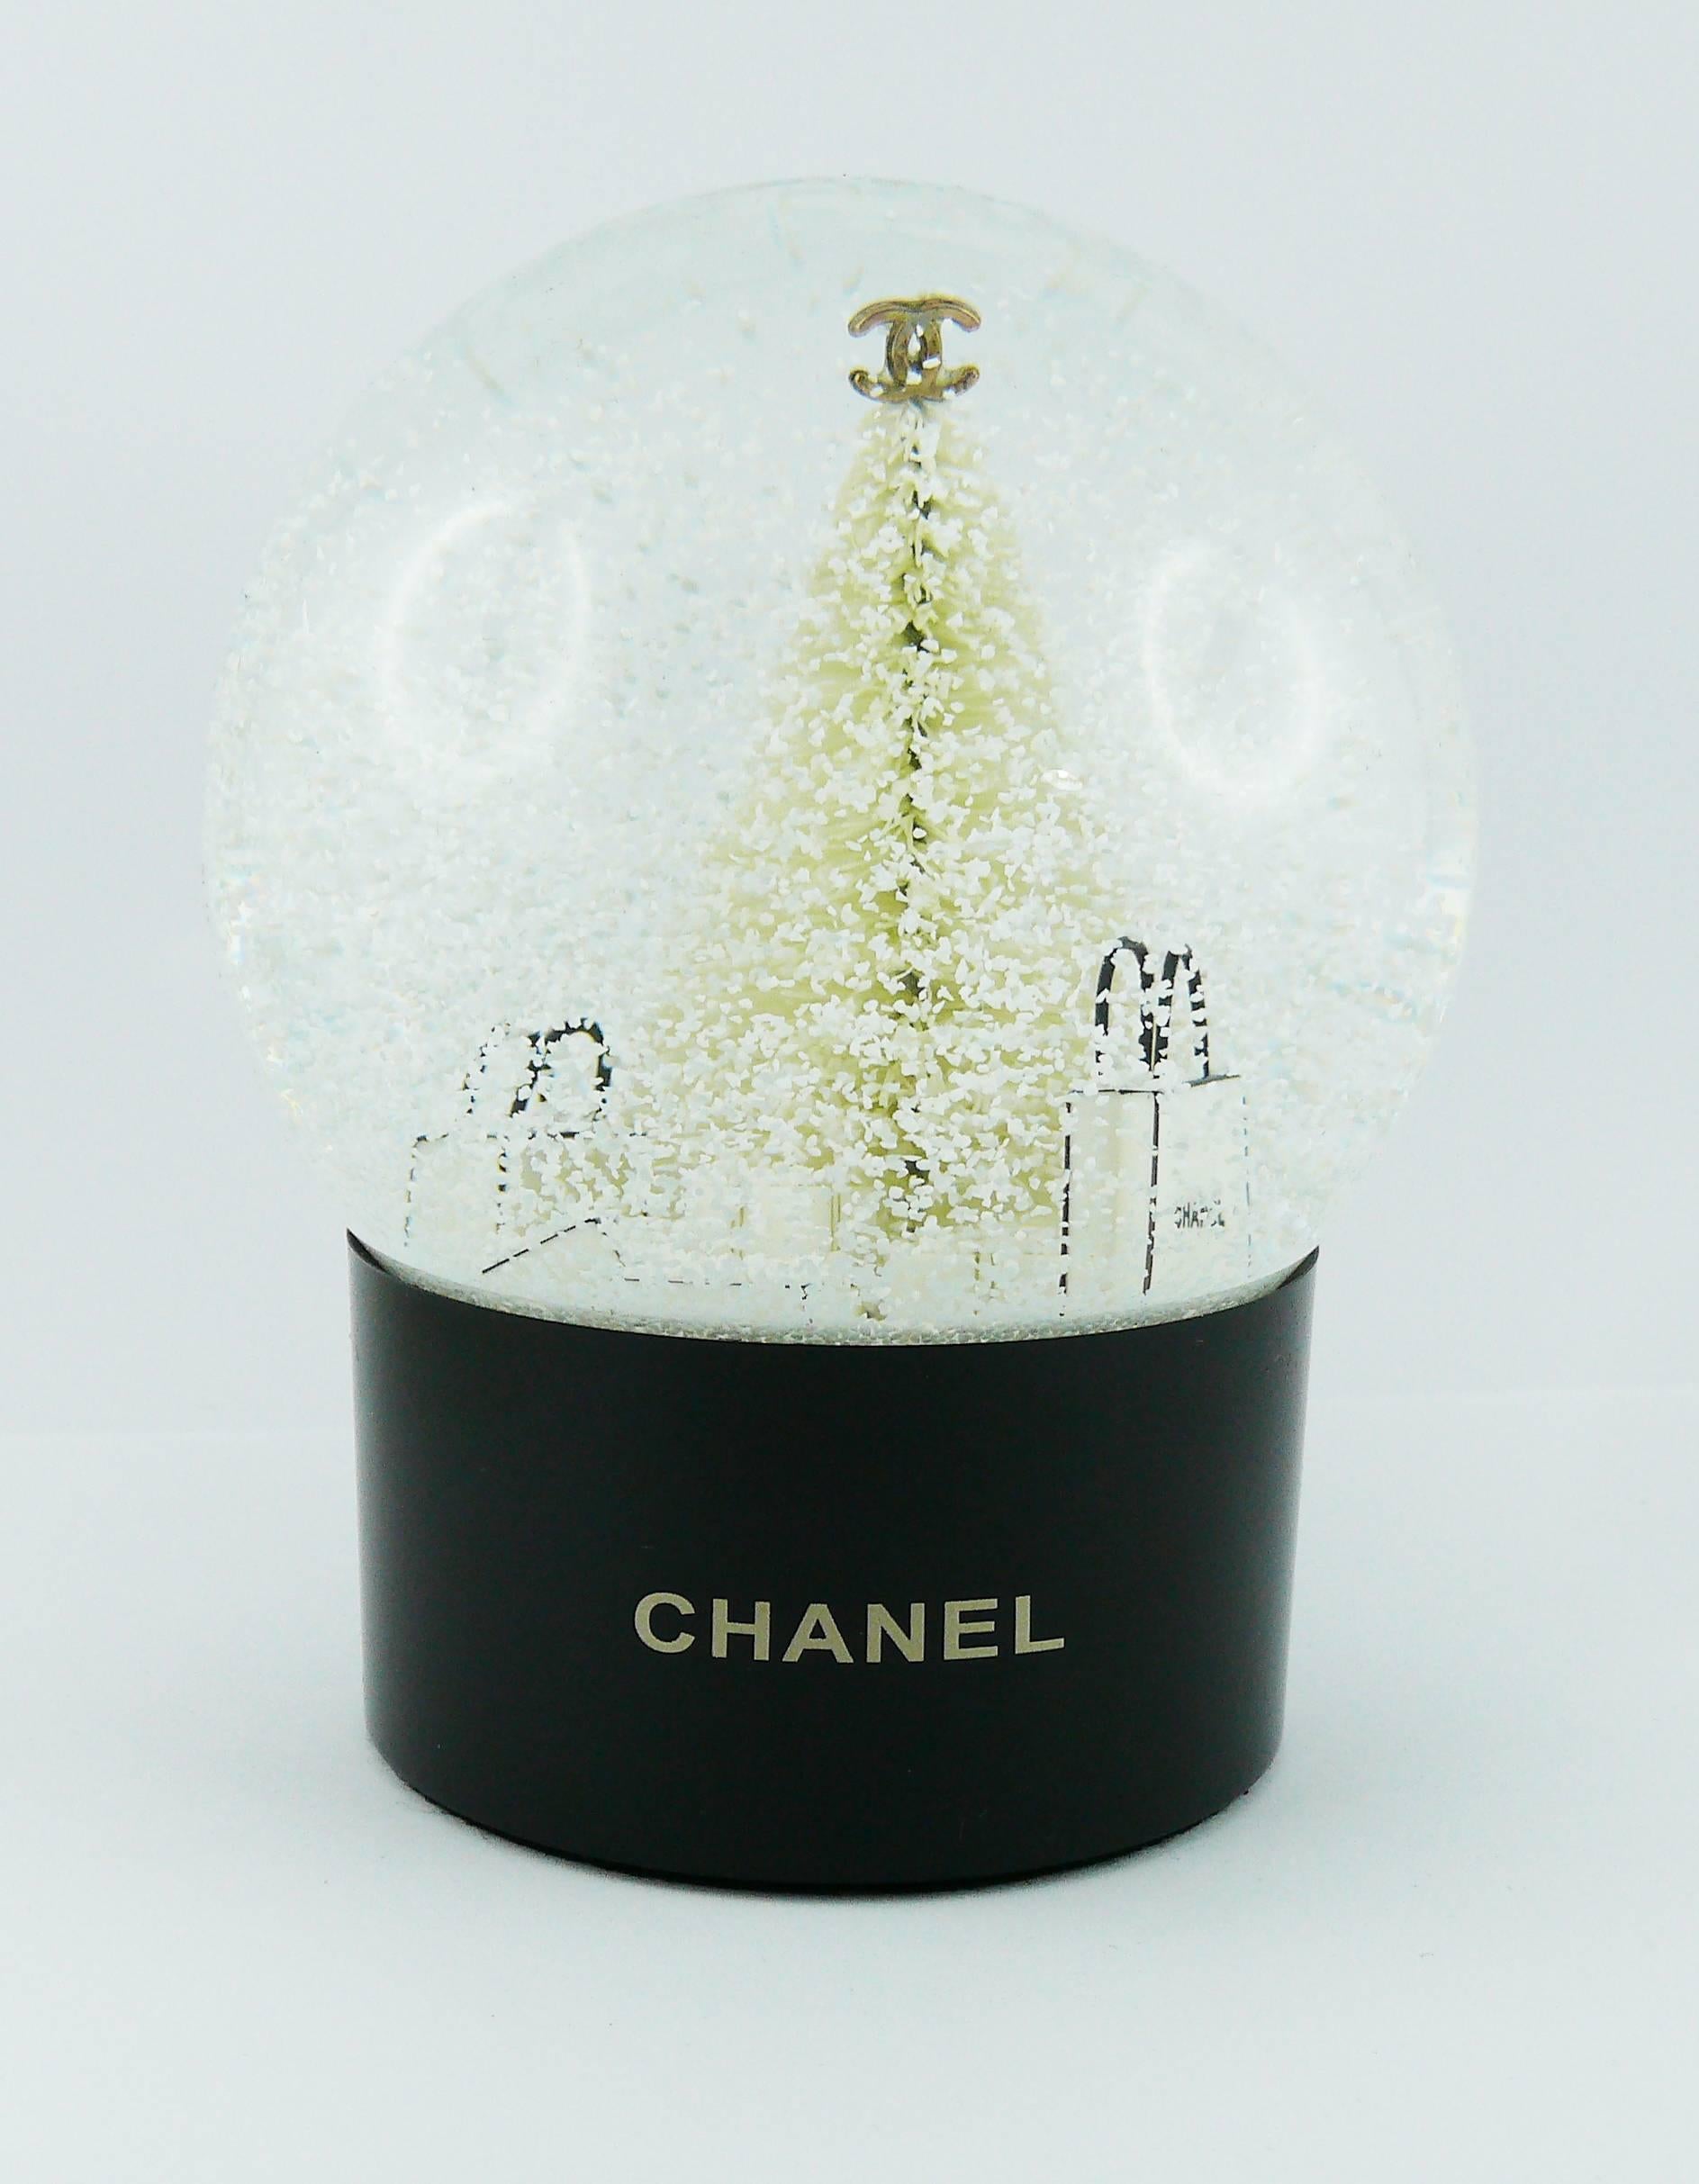 CHANEL VIP Christmas gift snow dome.

Unused condition with minor flaws (still with plastic protection at the base, just removed for photos) and original packaging (used).

Indicative measurements : height approx. 13 cm (5.12 inches) / base